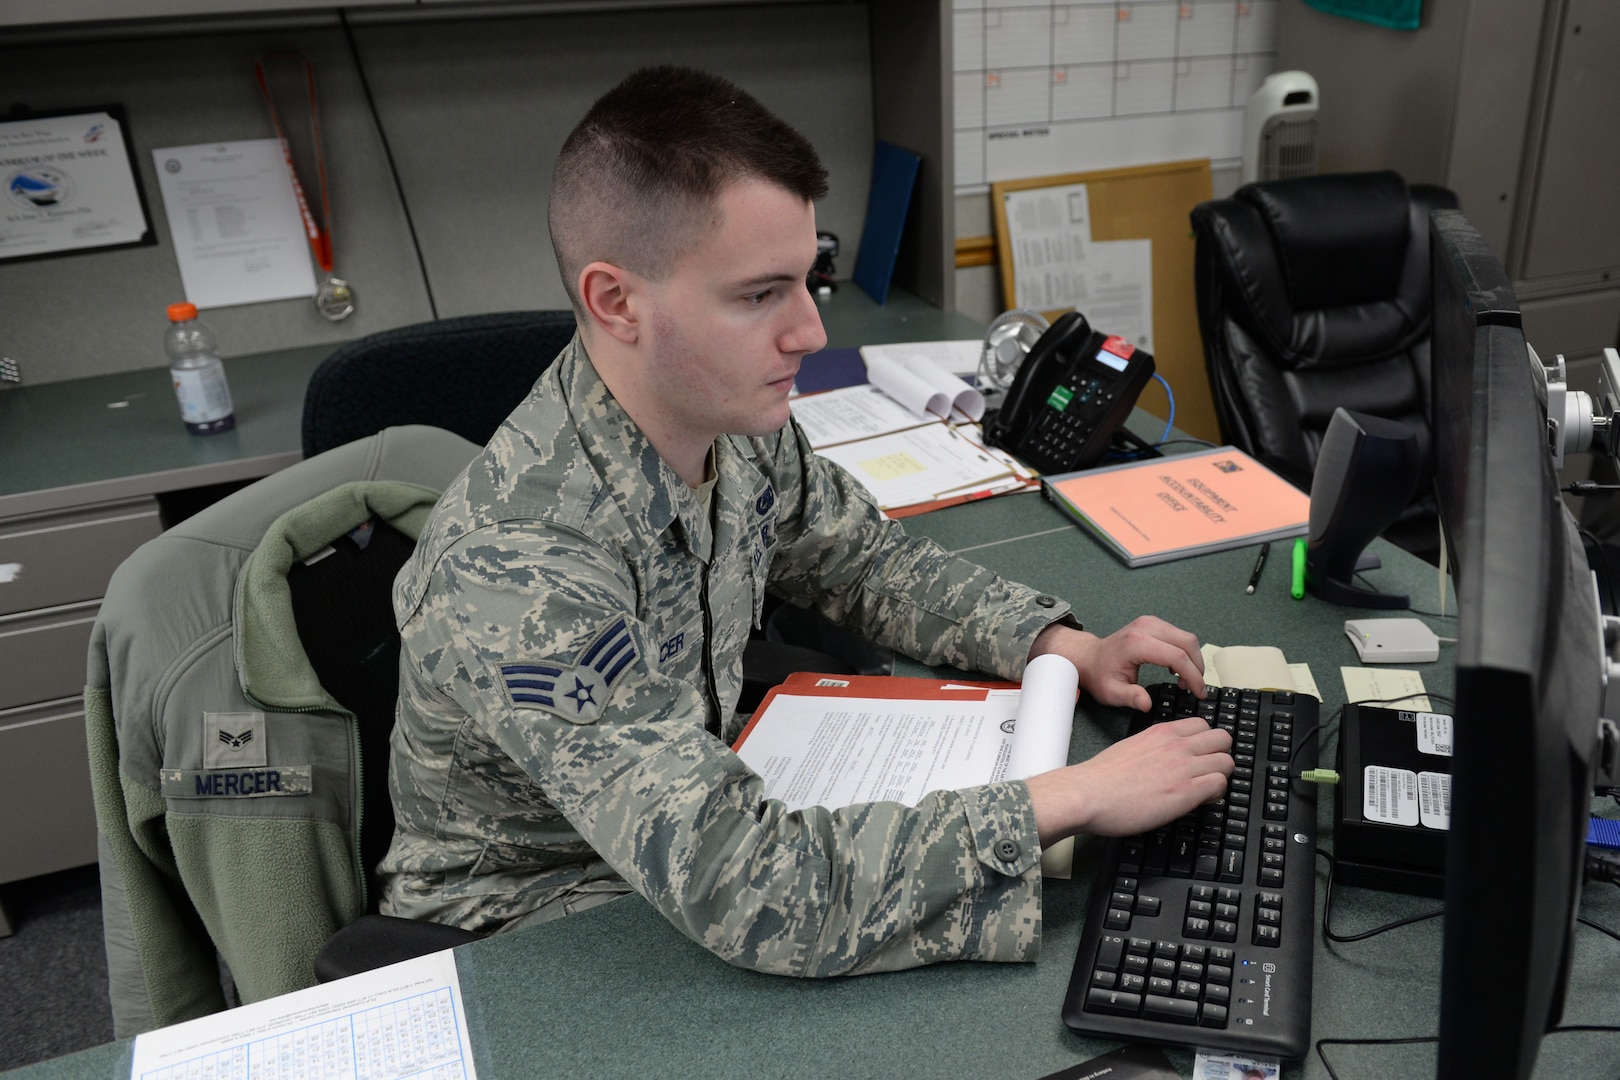 Senior Airman Christopher Mercer, with the 673d Logistics Readiness Squadron’s Equipment Accountability Element, audits account information, Jan. 18, 2018, at Joint Base Elmendorf-Richardson, Alaska. EAE works with more than 130 different accounts serving as equipment review and authorization activity, and is responsible for updating base level data.